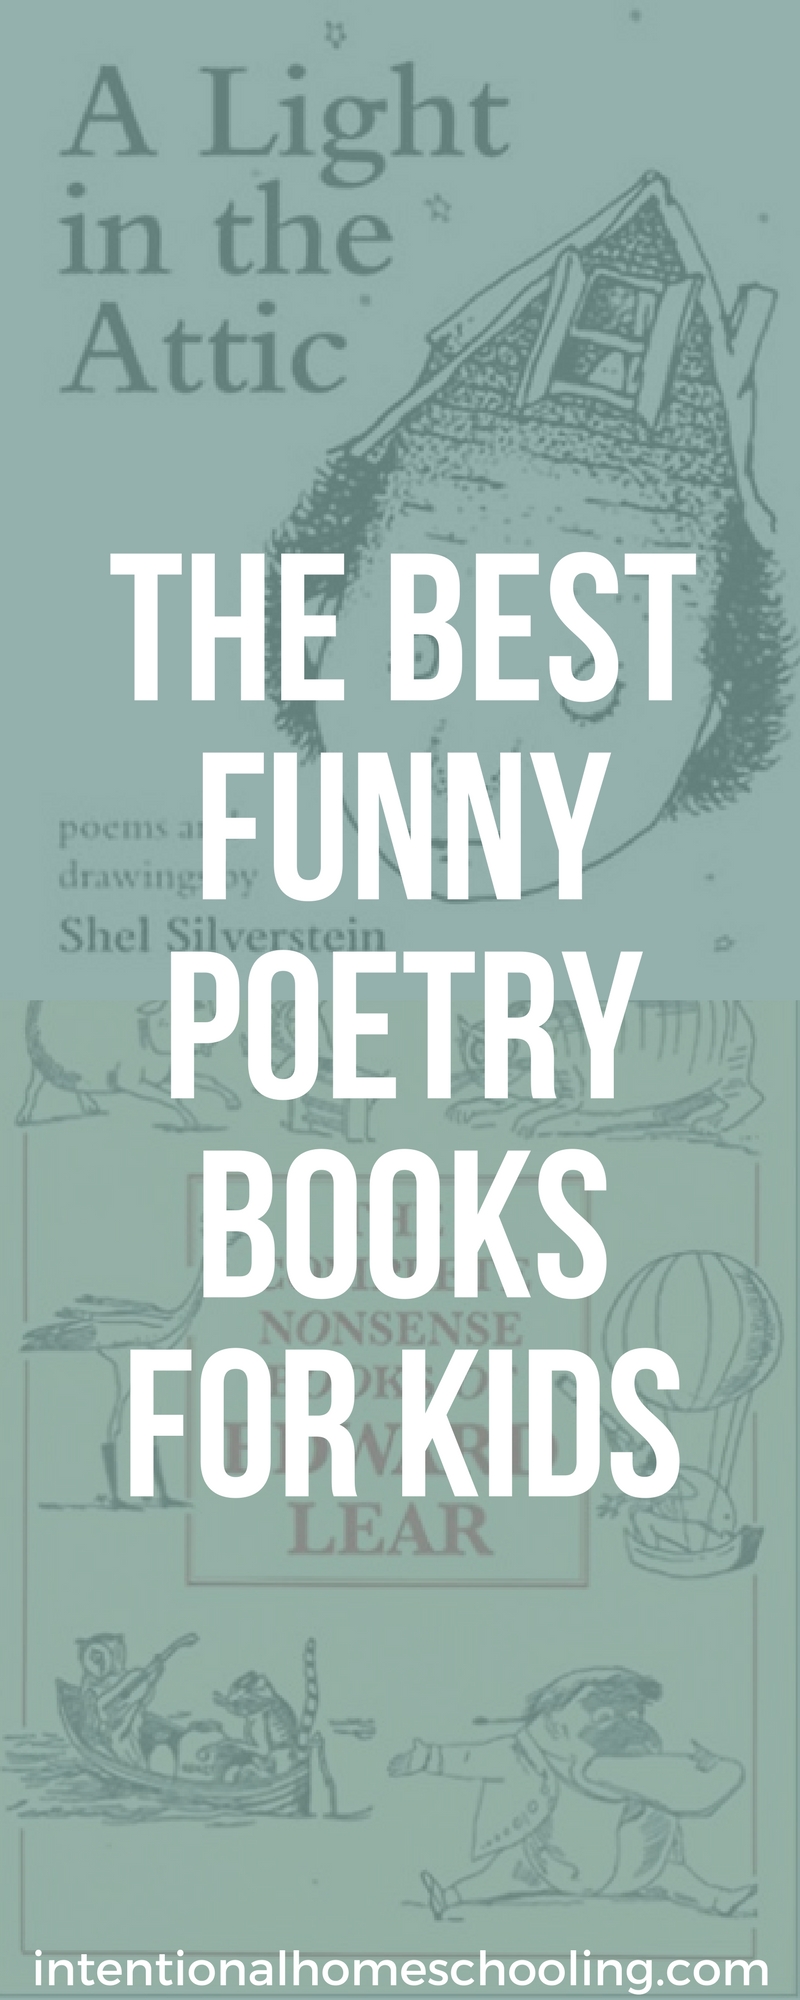 The Best Funny Poetry Books for Kids - great for poetry tea time.